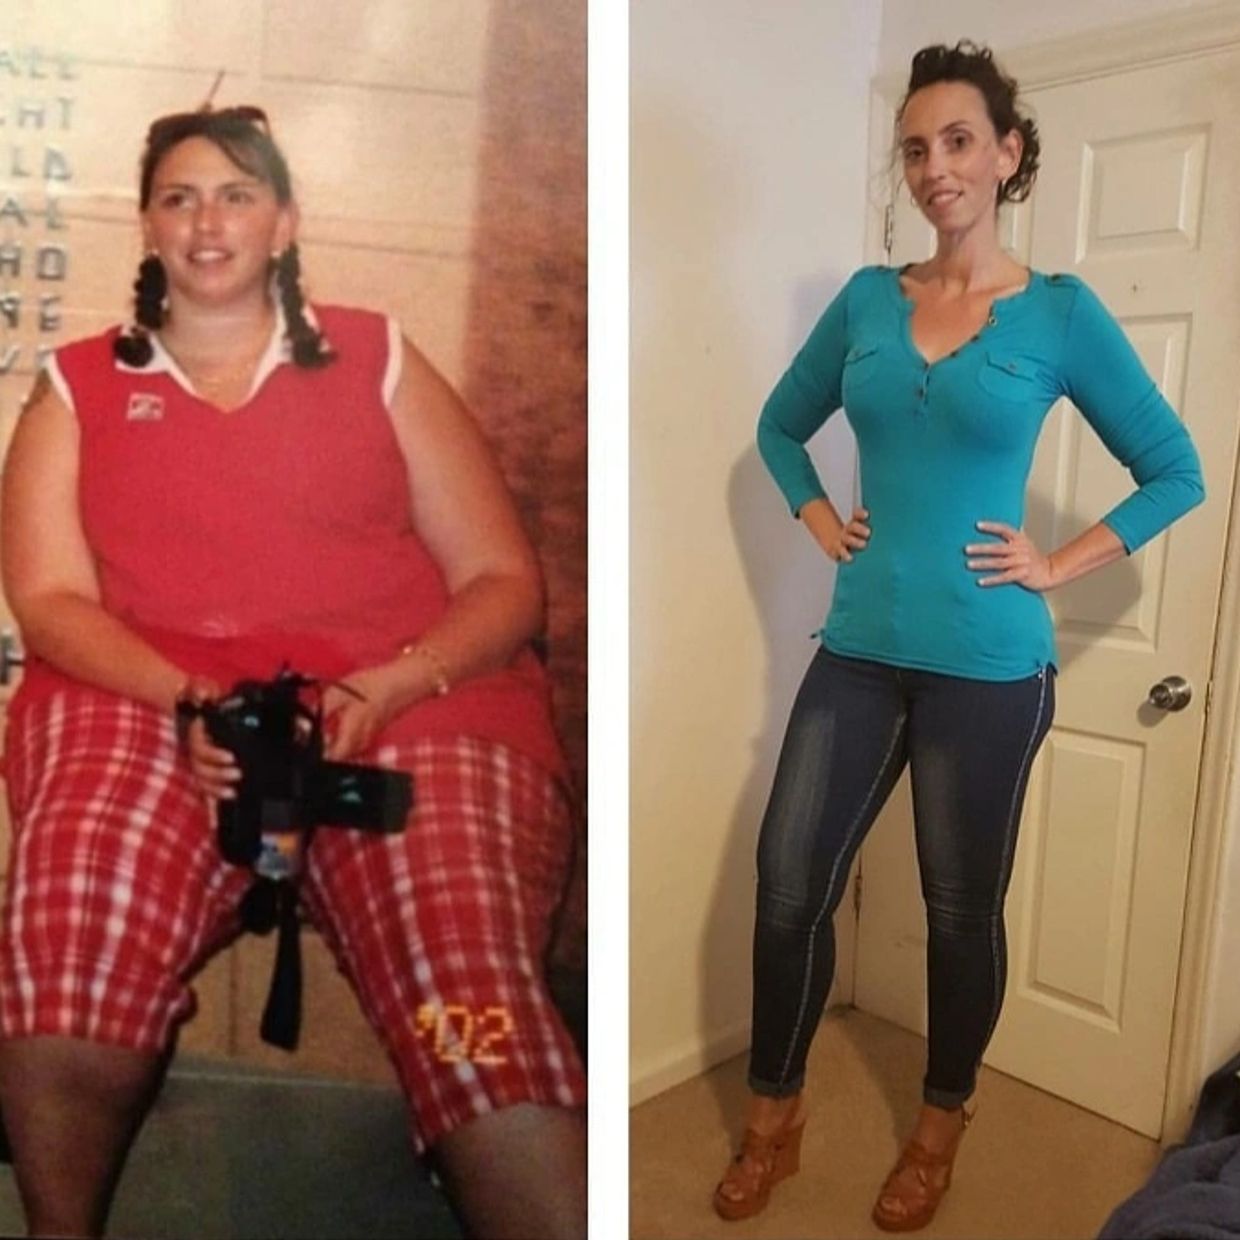 Meet Torrie, 
"Mommy why are you fat?"  After hearing that, She decided to change her life. 